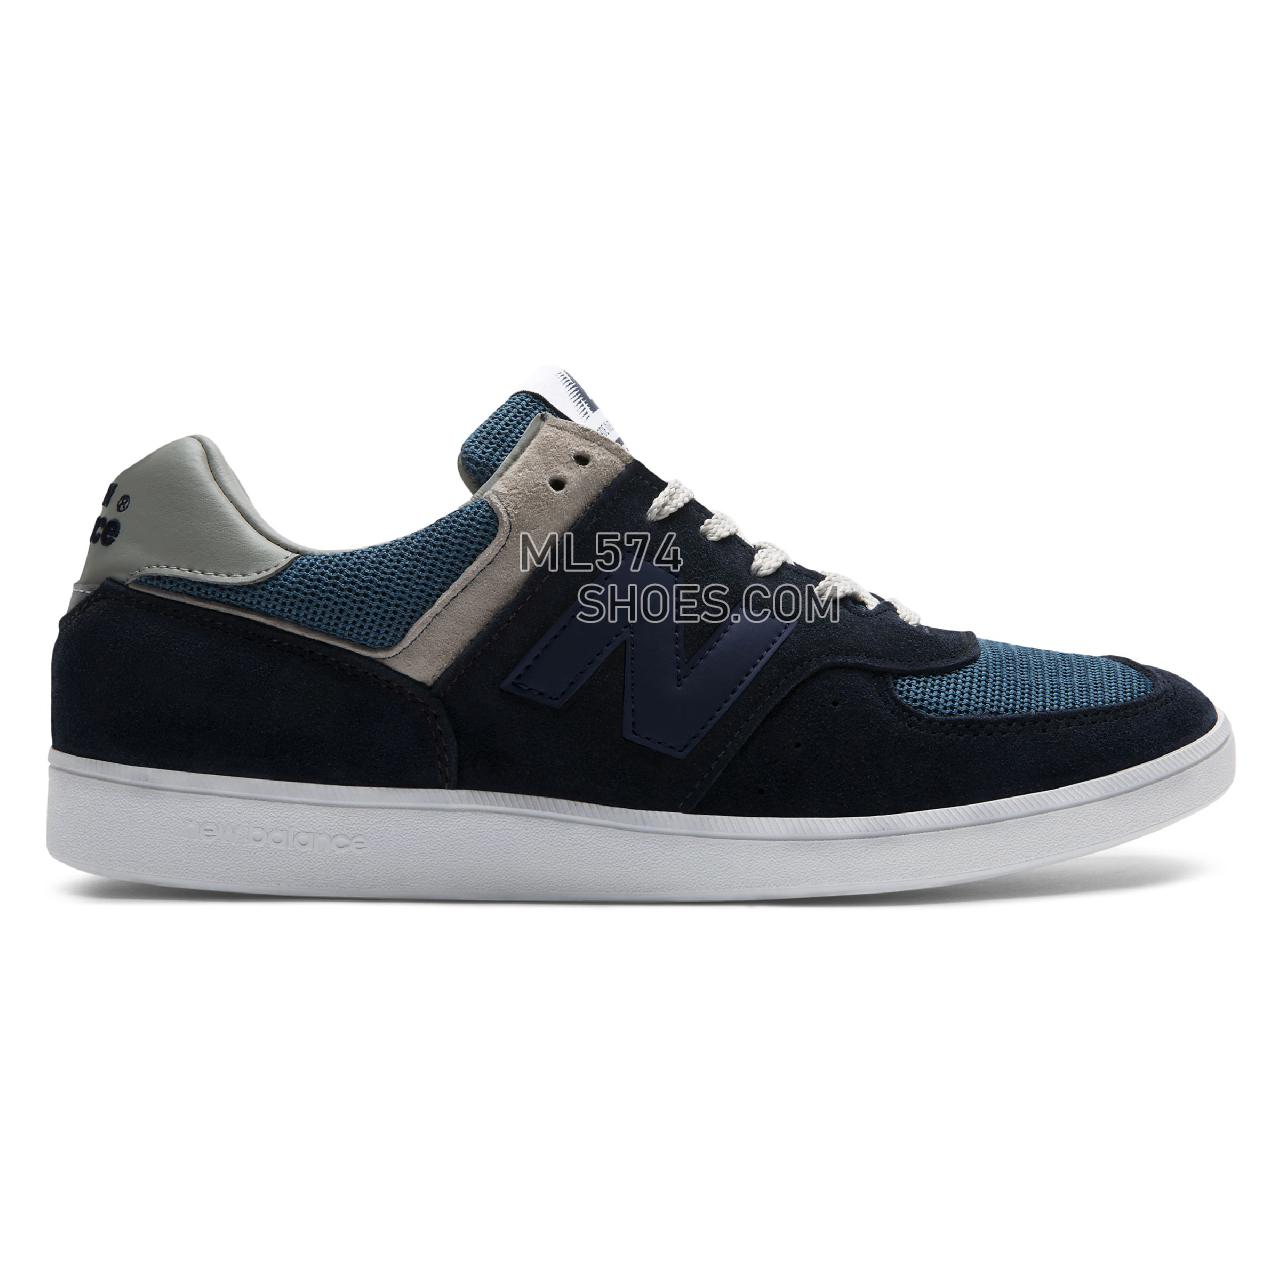 New Balance CT576 Made in UK - Men's 576 - Classic Navy with Grey - CT576OGN